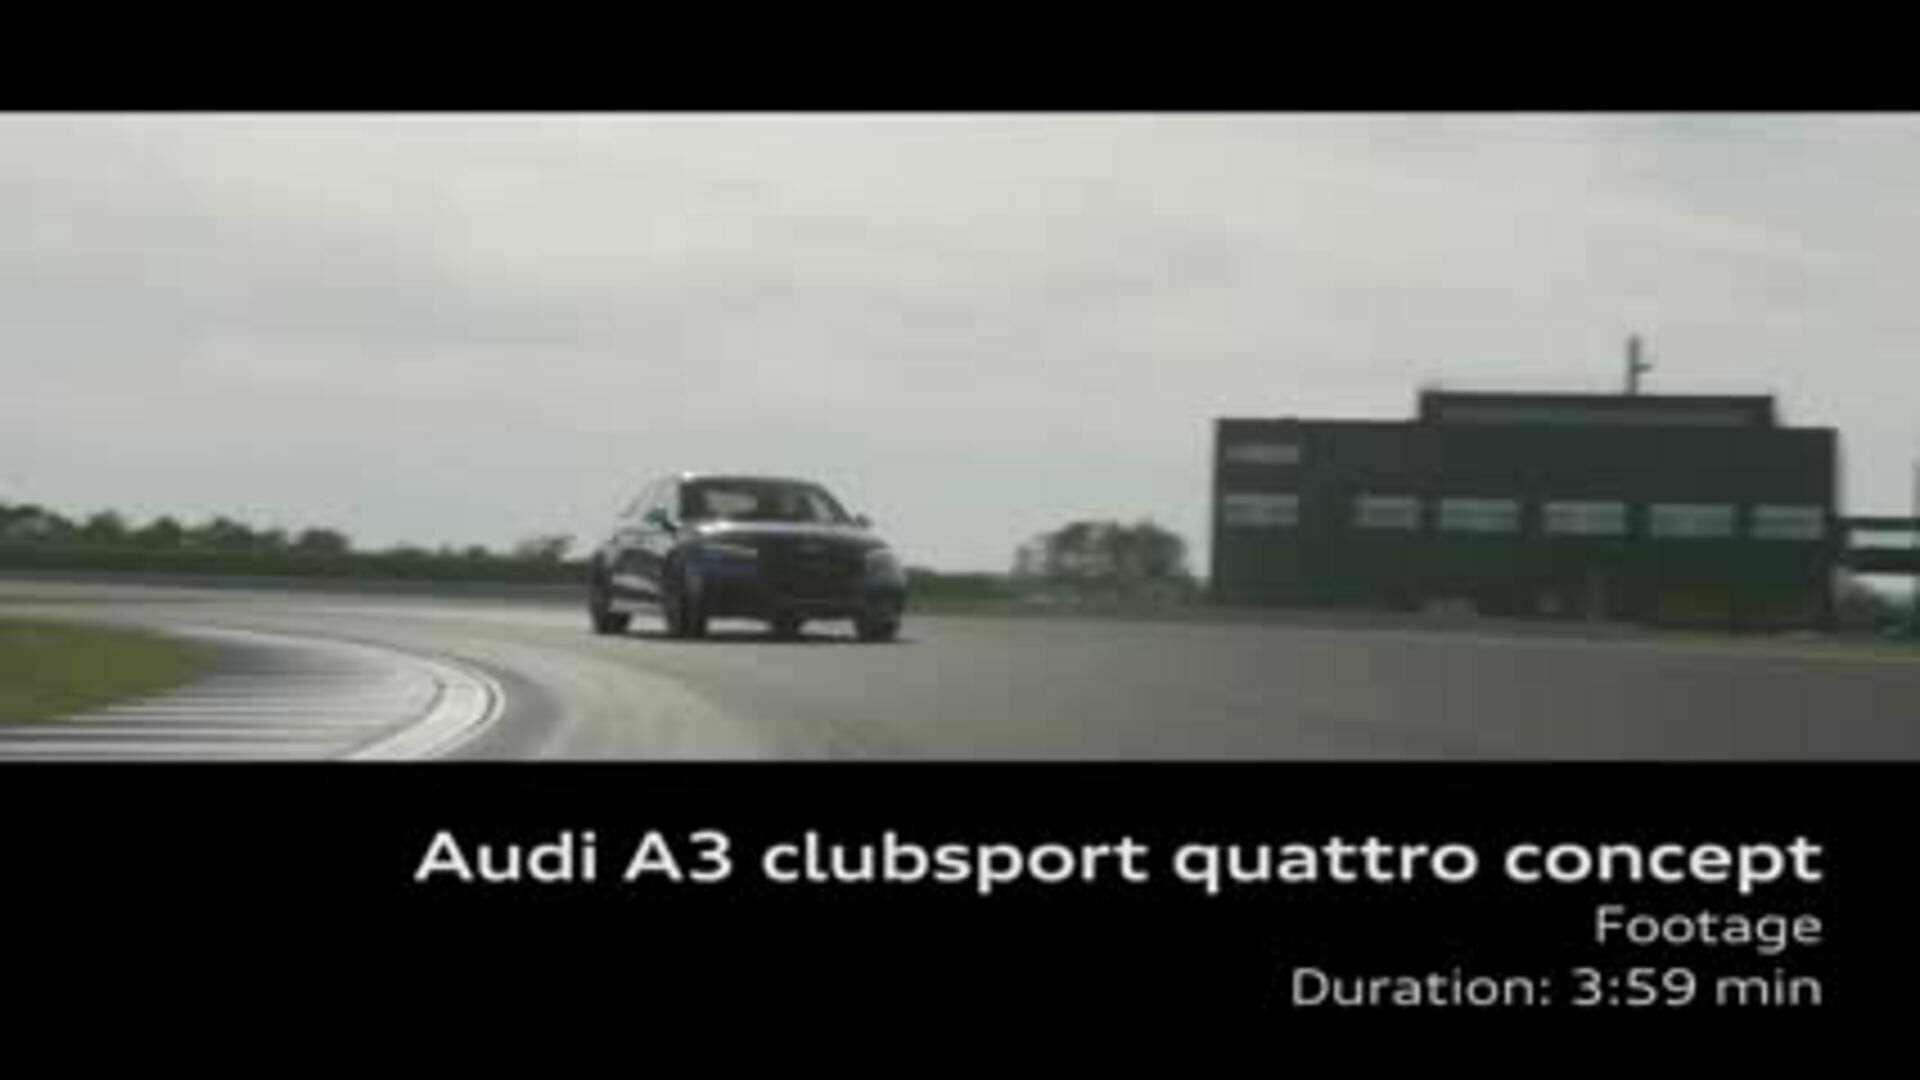 The Audi A3 clubsport quattro concept - Footage